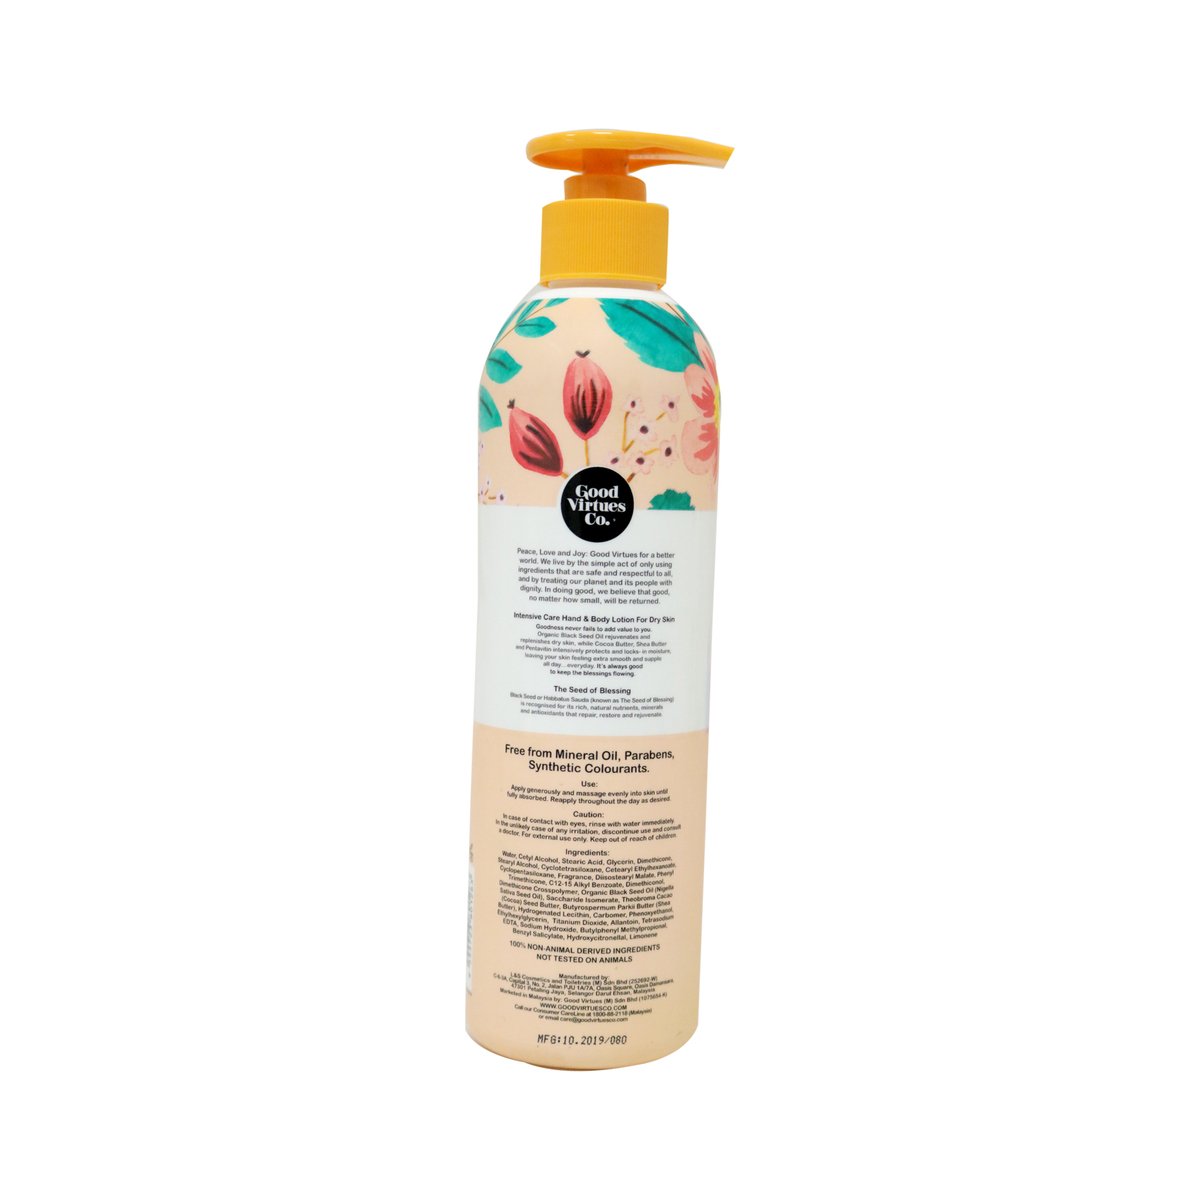 Good Vertues.co Hand & Body Lotion Intensice Care 300ml